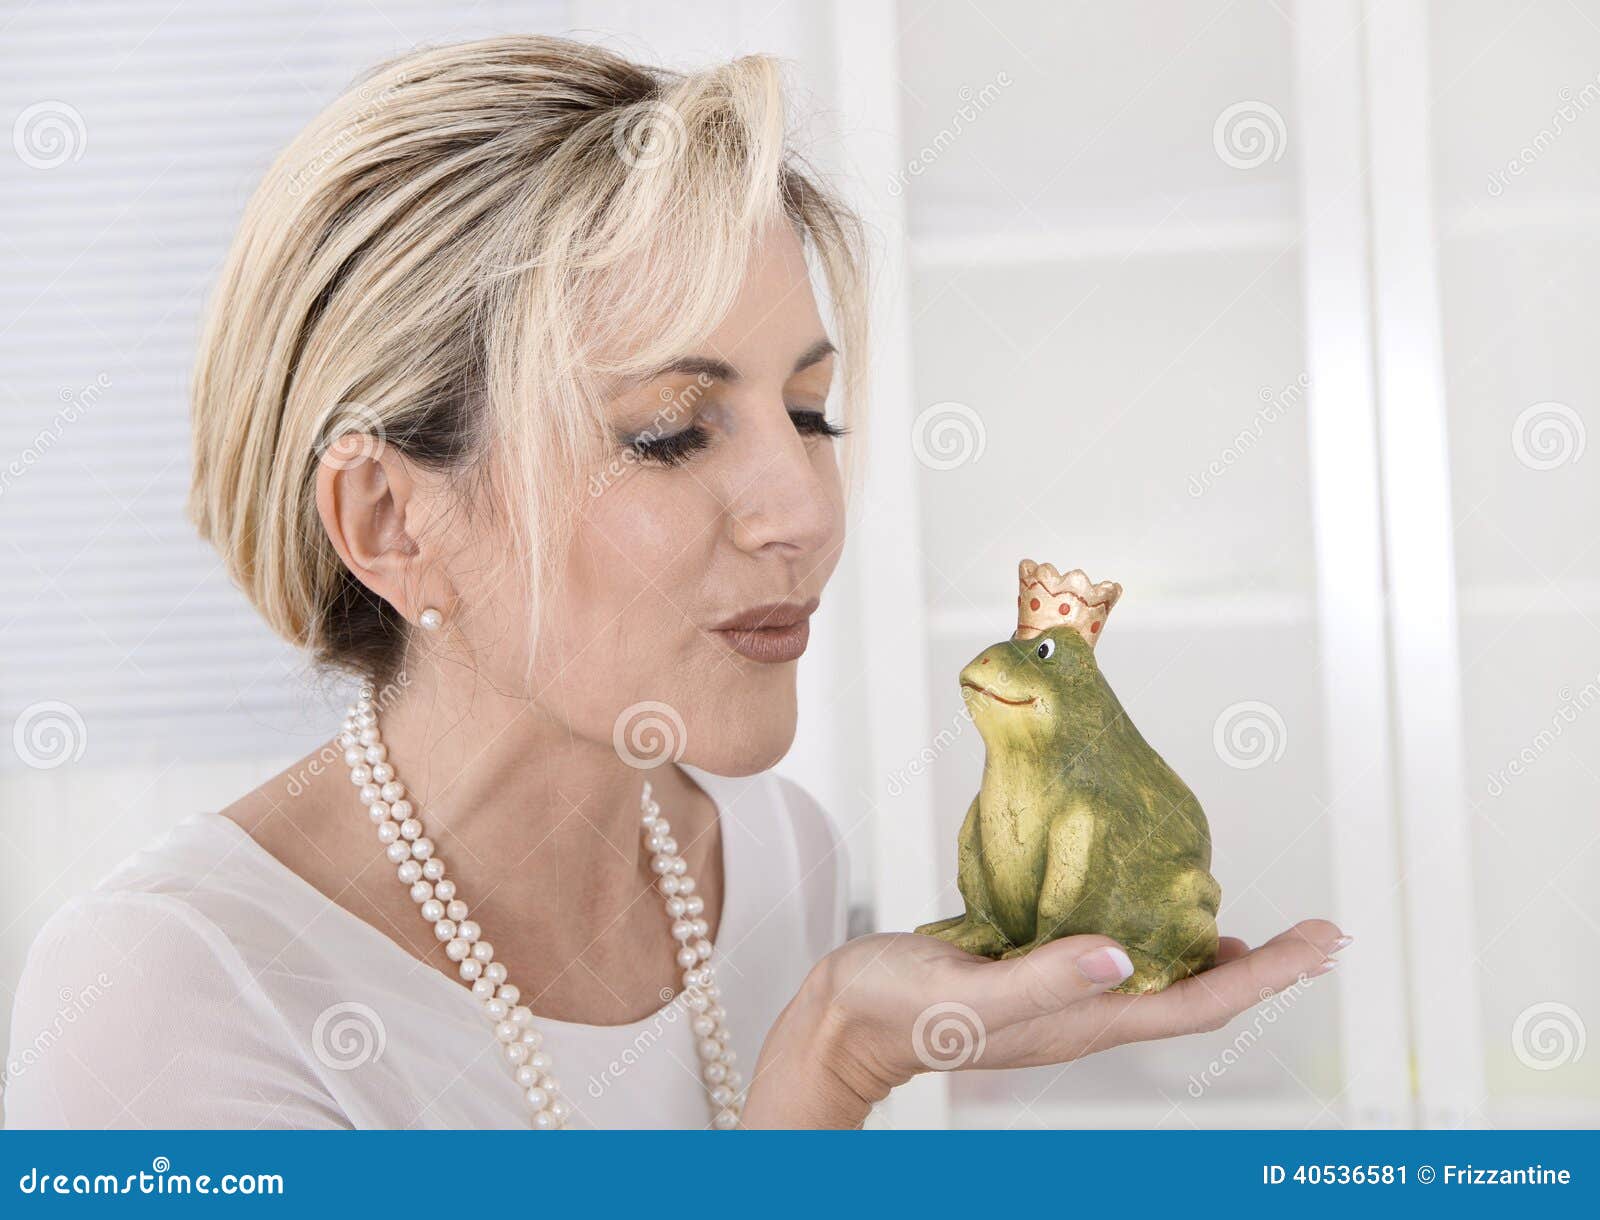 single attractive older woman with a frog king in her hands.